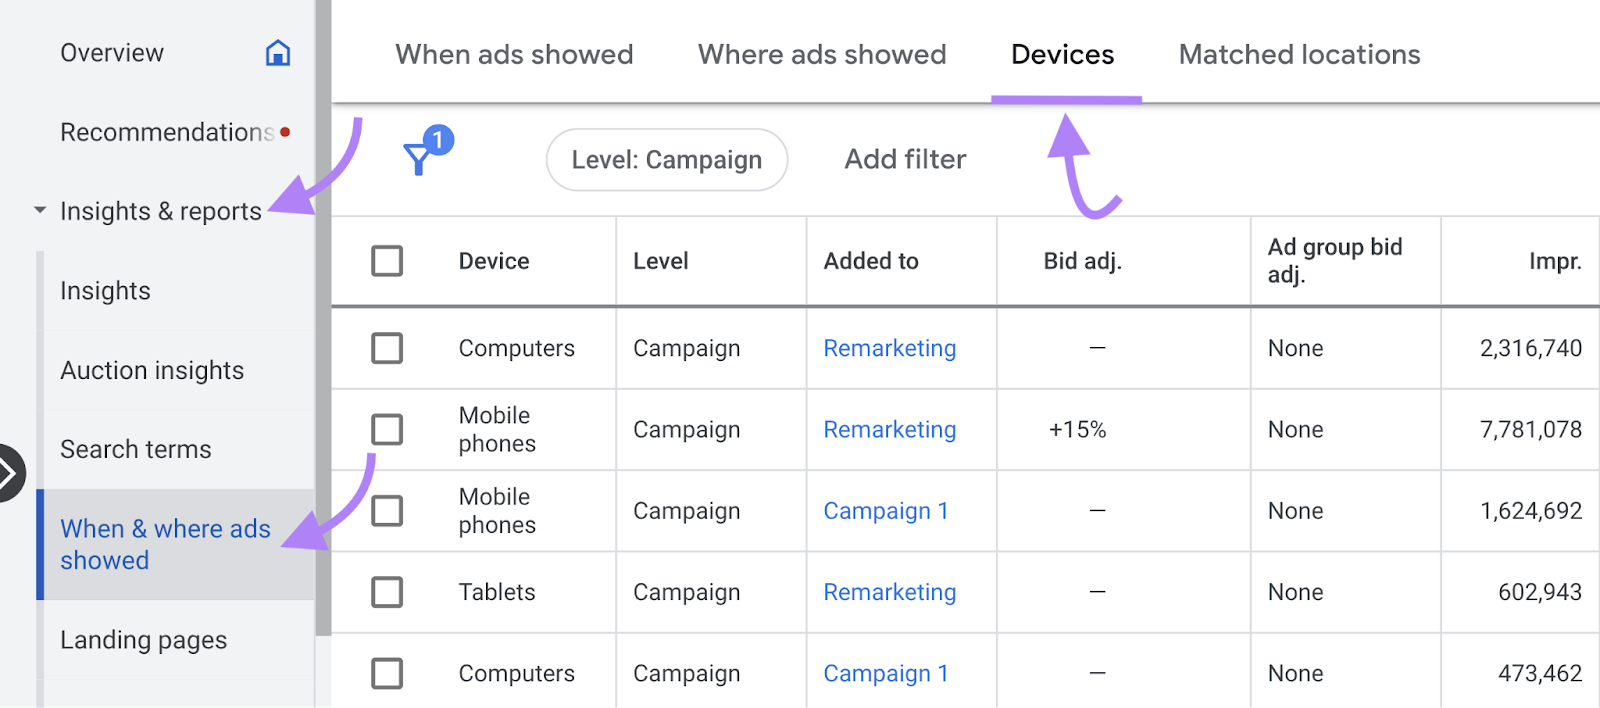 navigation to “Devices” tab in Google Ads